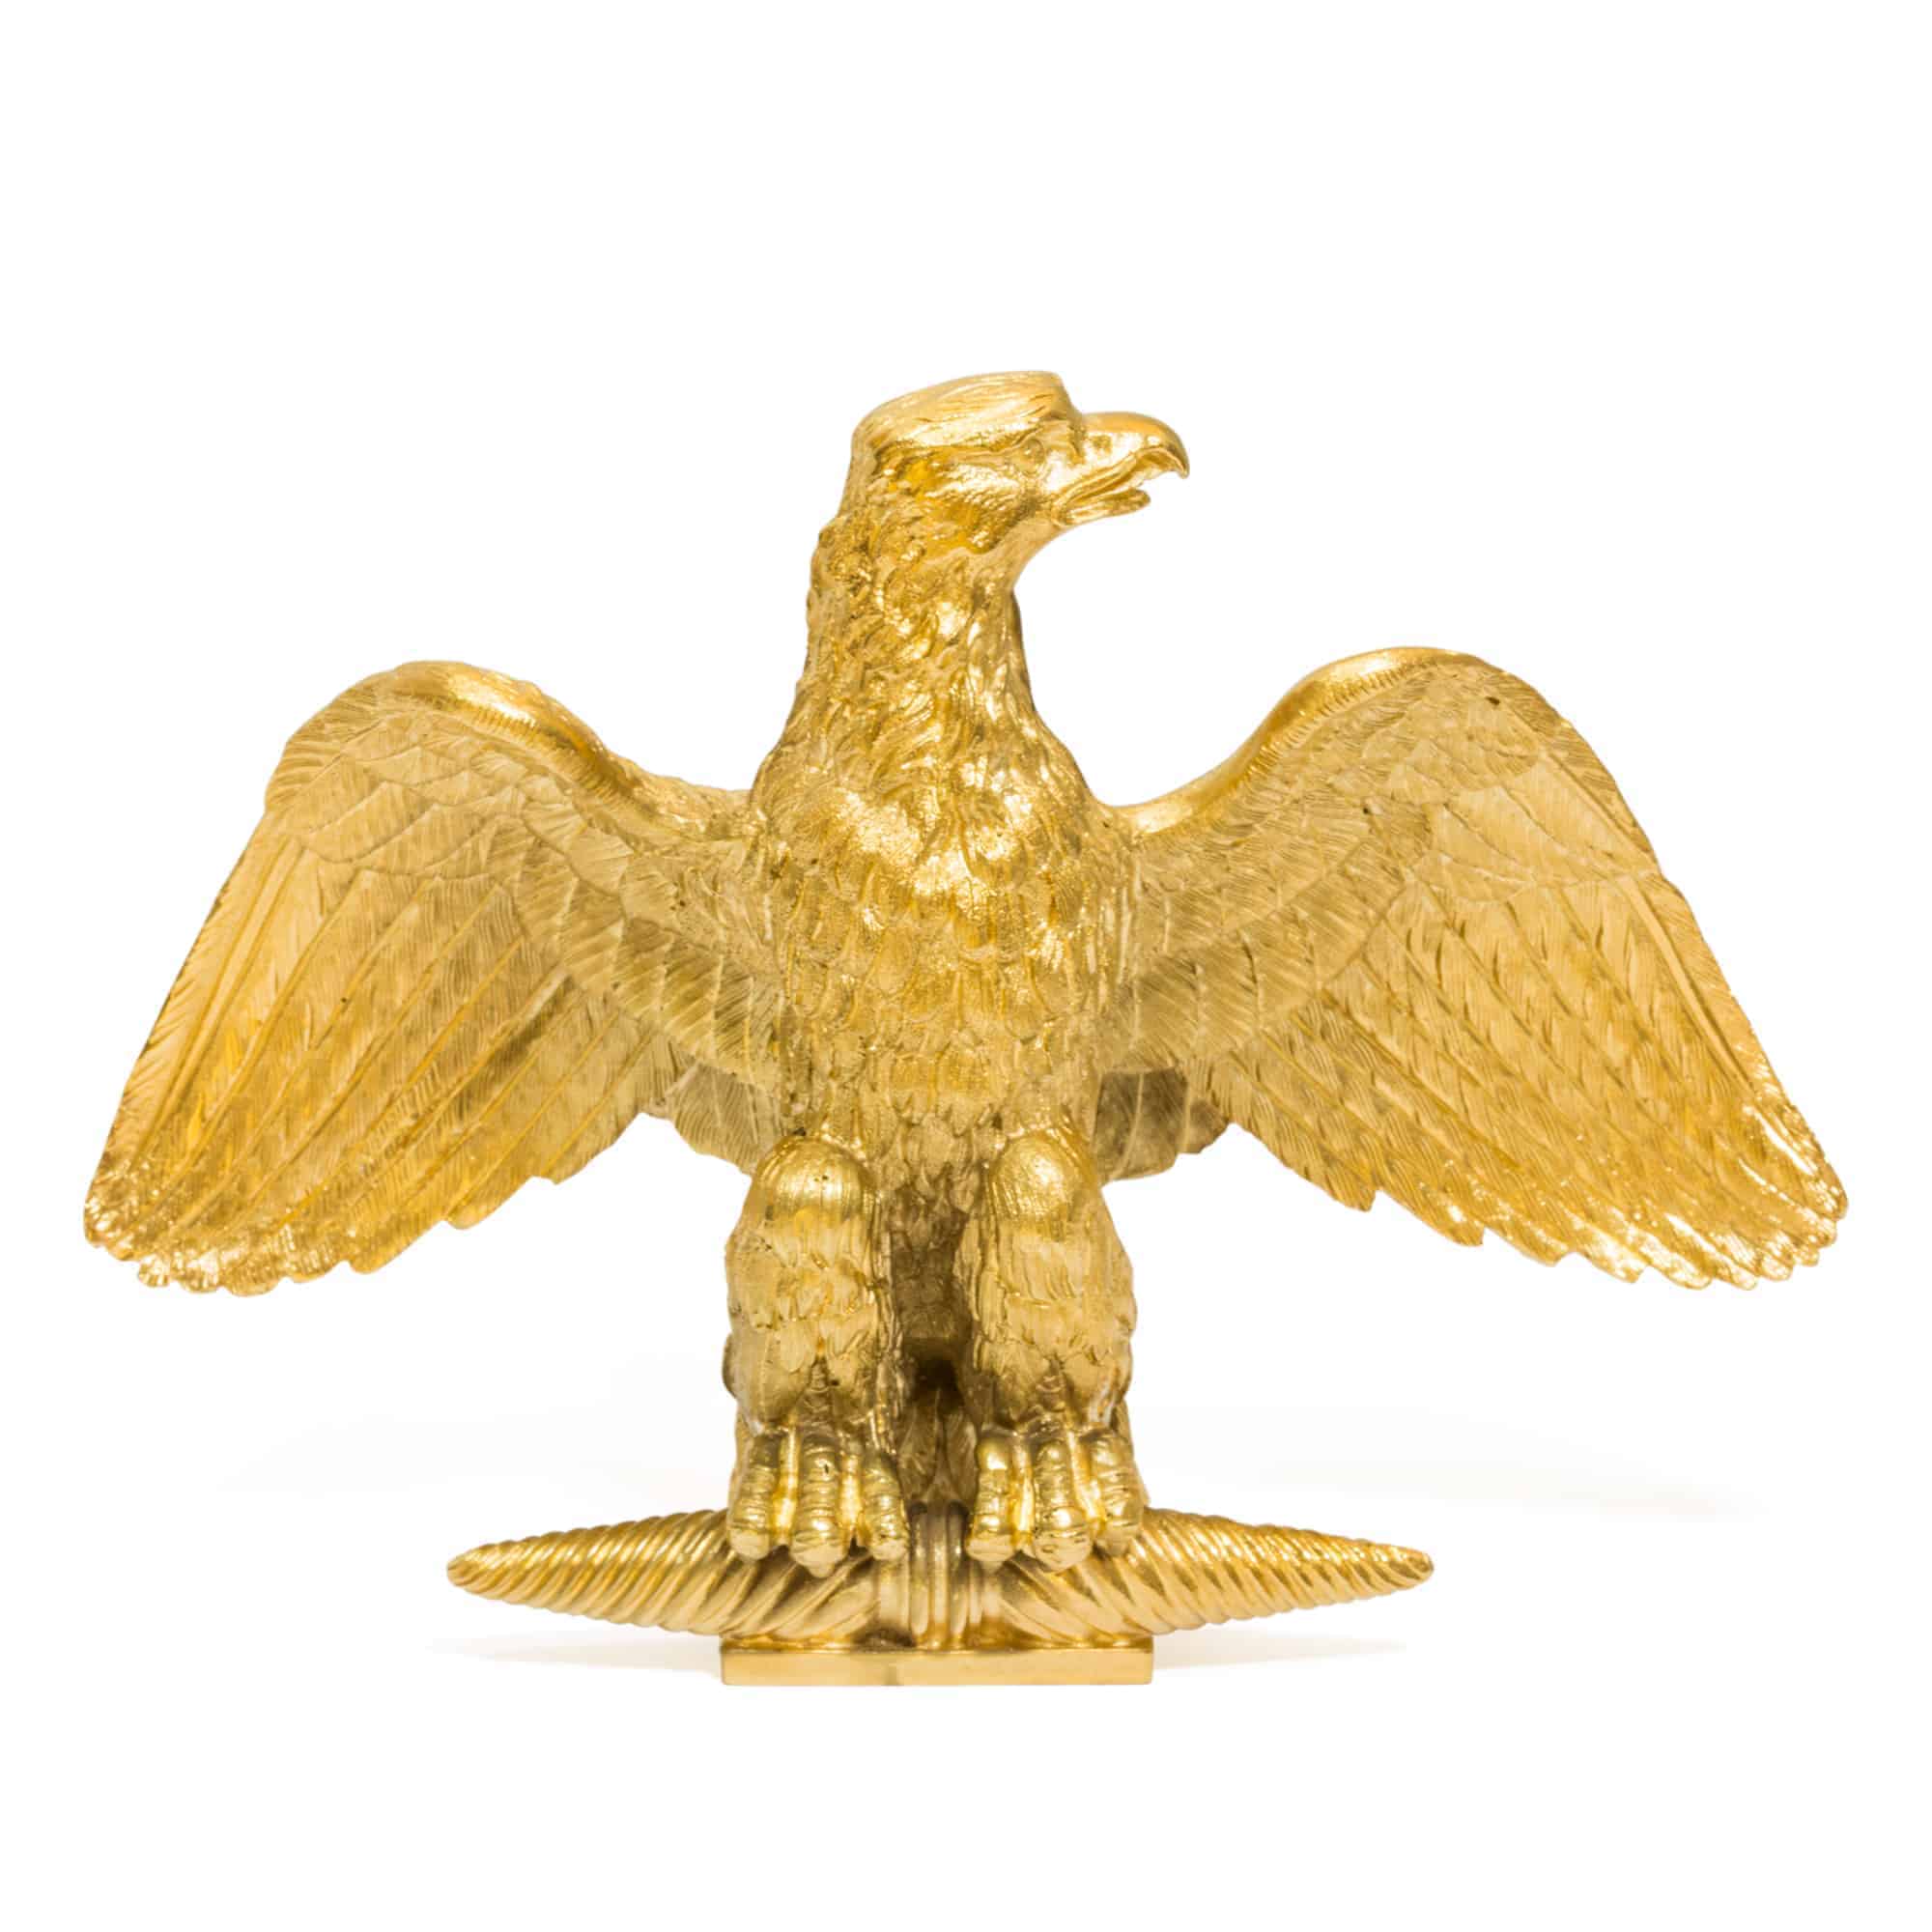 Aigle imperial bestiaire vermeil odiot